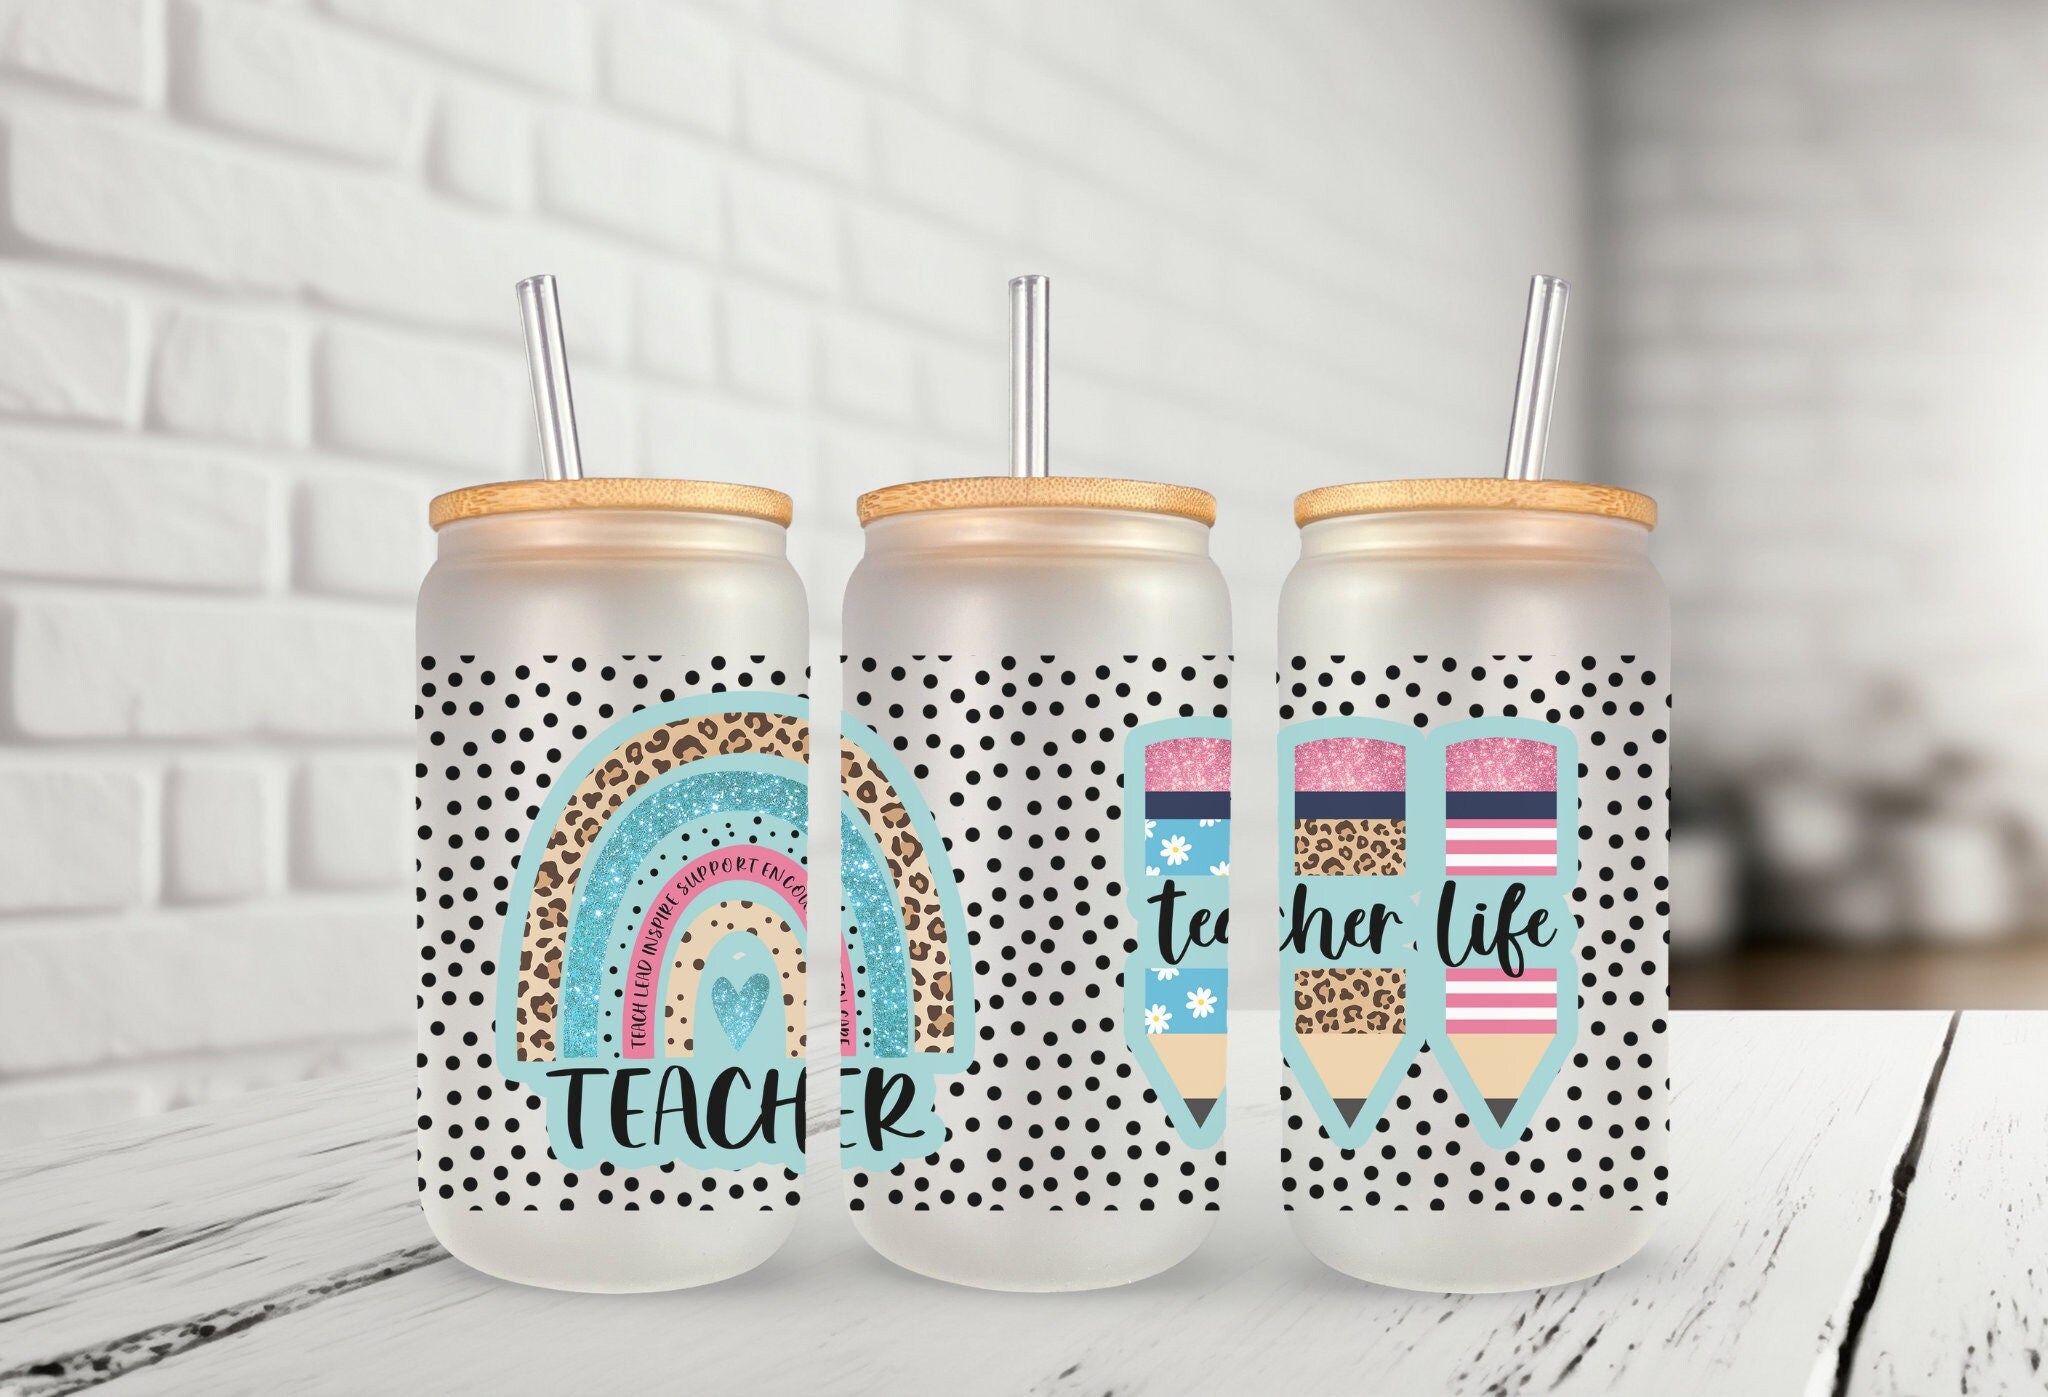 Living That Teacher Life Personalization Iced Coffee Cup 16oz Glass Soda  Can Cup W/ Bamboo Top & Glass Straw Glass Libby Cup Teacher Gift 